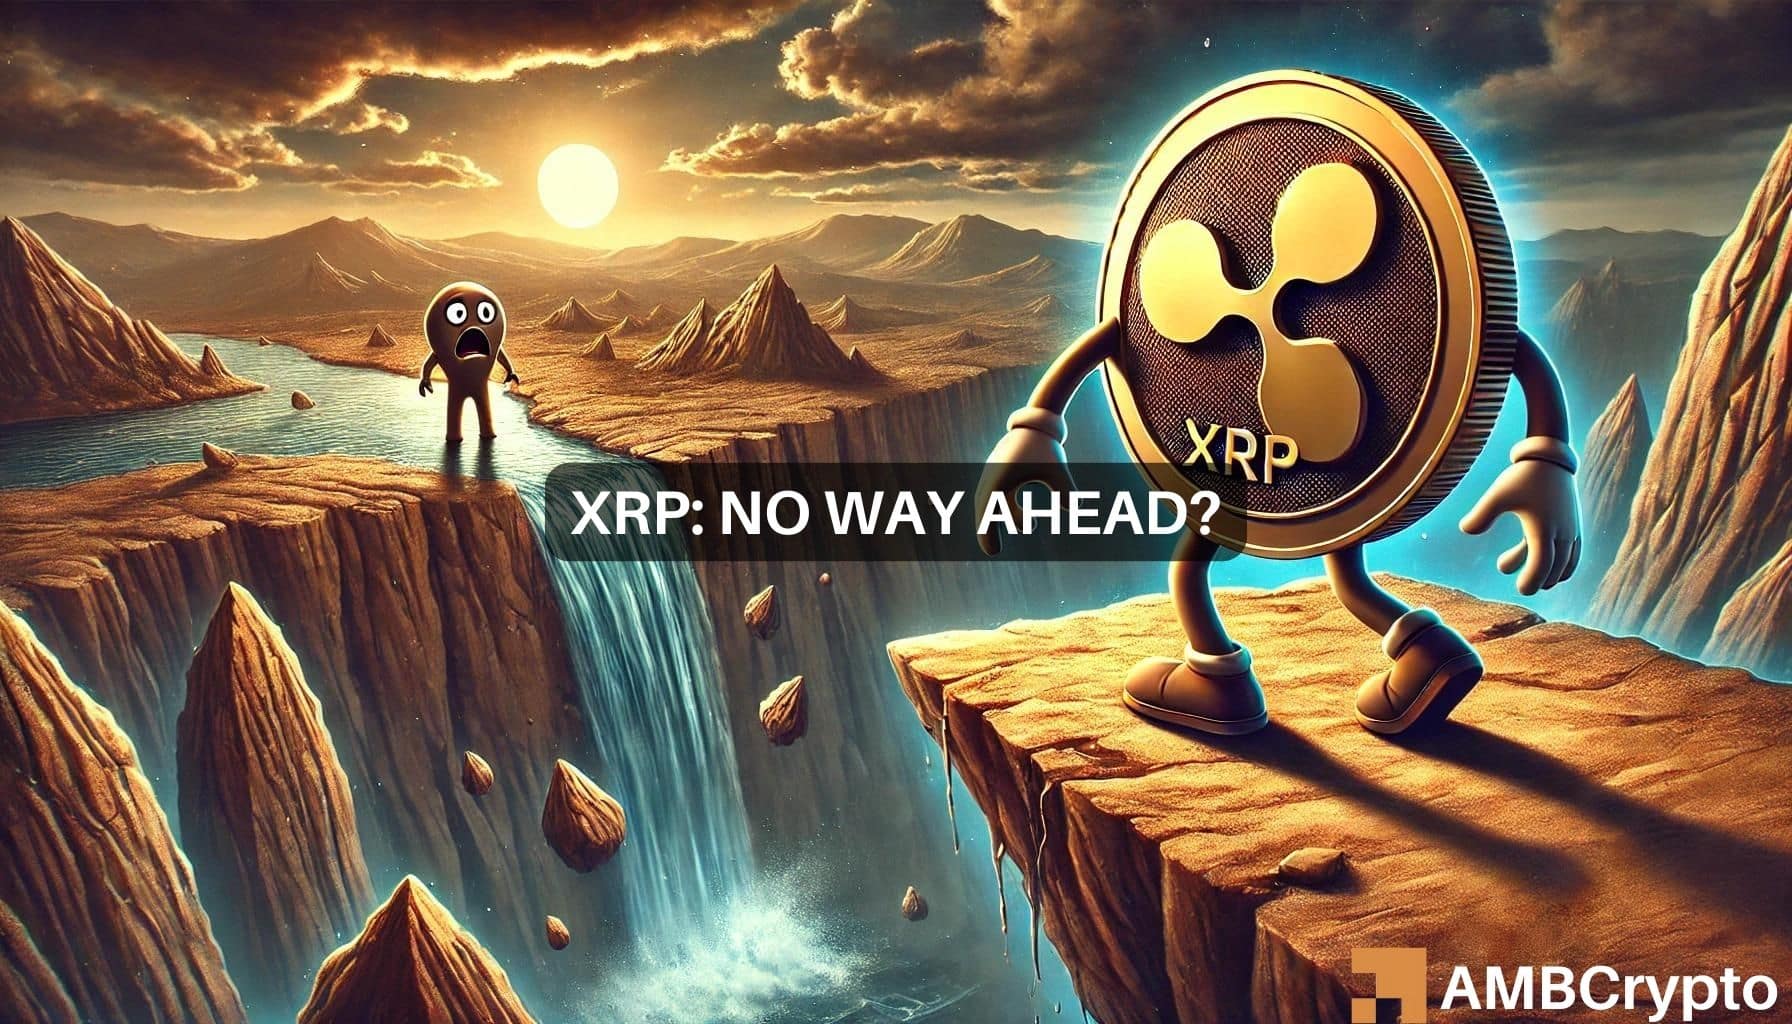 XRP drops 12.24% amid broader market declines, with the ongoing Ripple v SEC lawsuit influencing future movements.